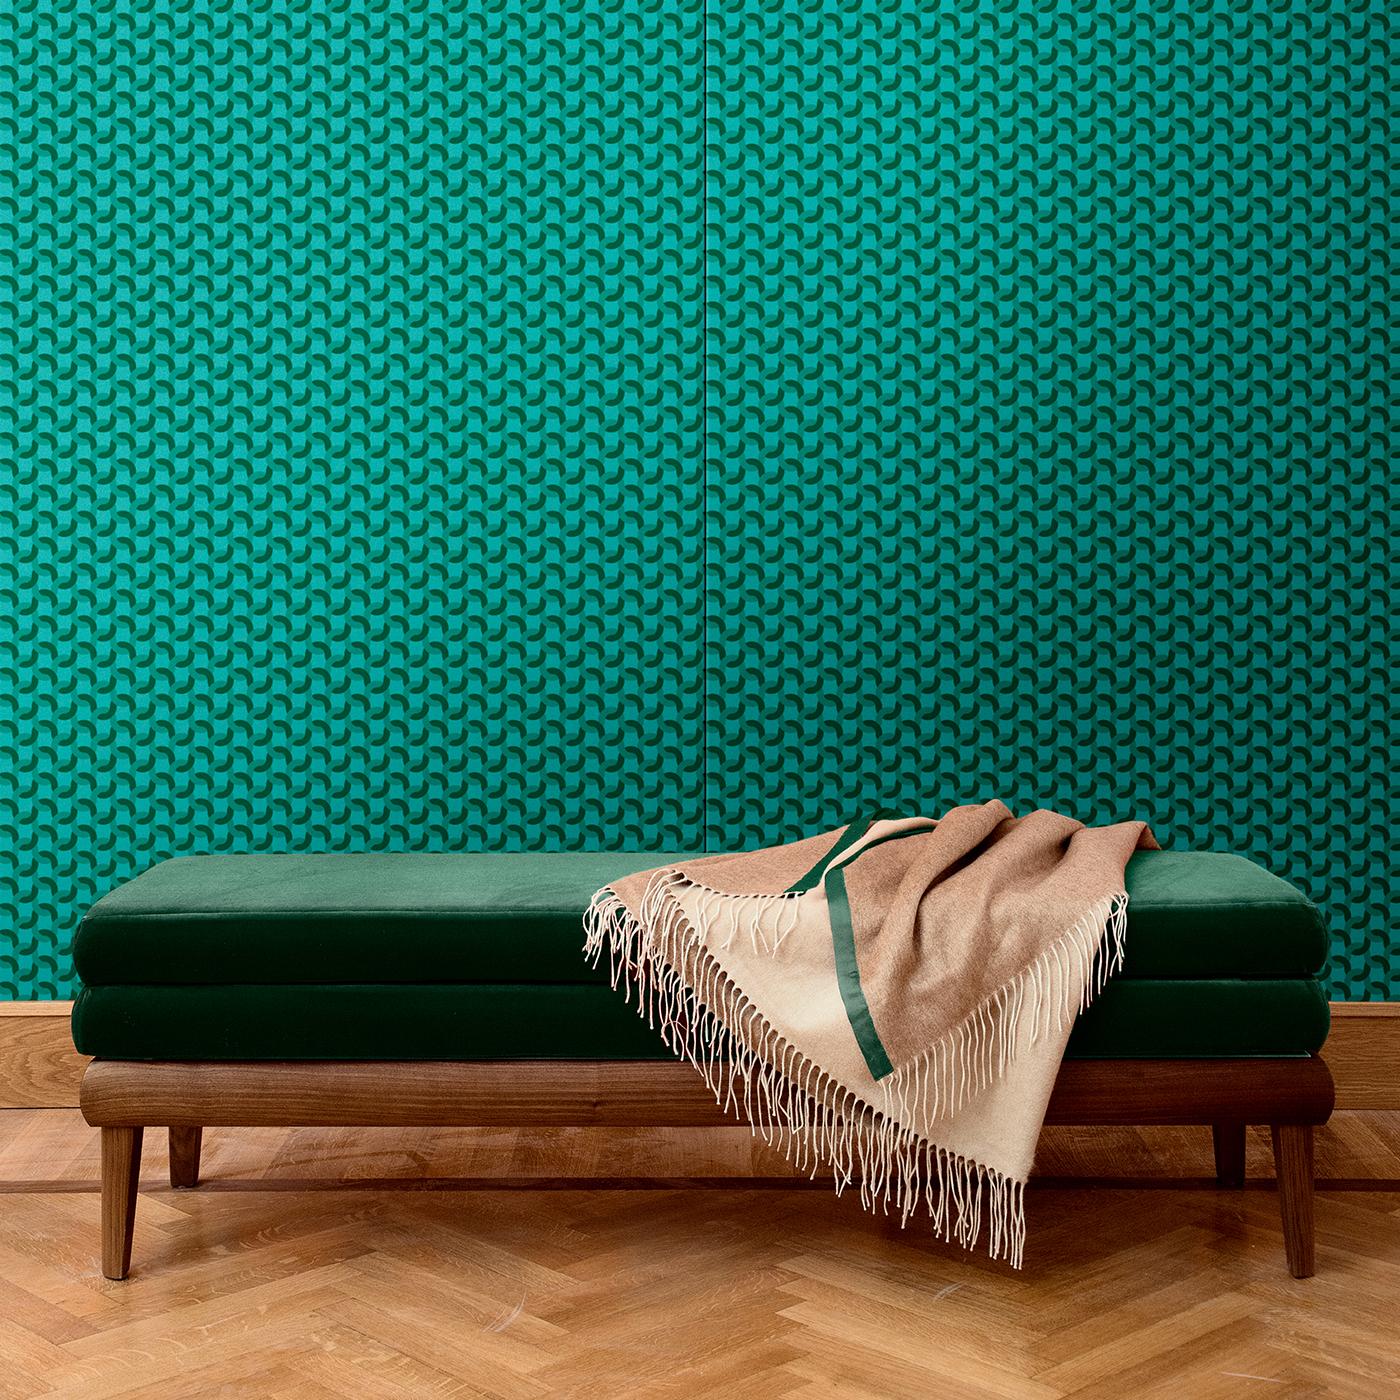 Part of the Geometric collection of wall coverings boasting an abstract motif, this piece was crafted of silk and cotton blending different shades of green to obtain a mesmerizing texture that will suit any elegant interior. This piece comes as